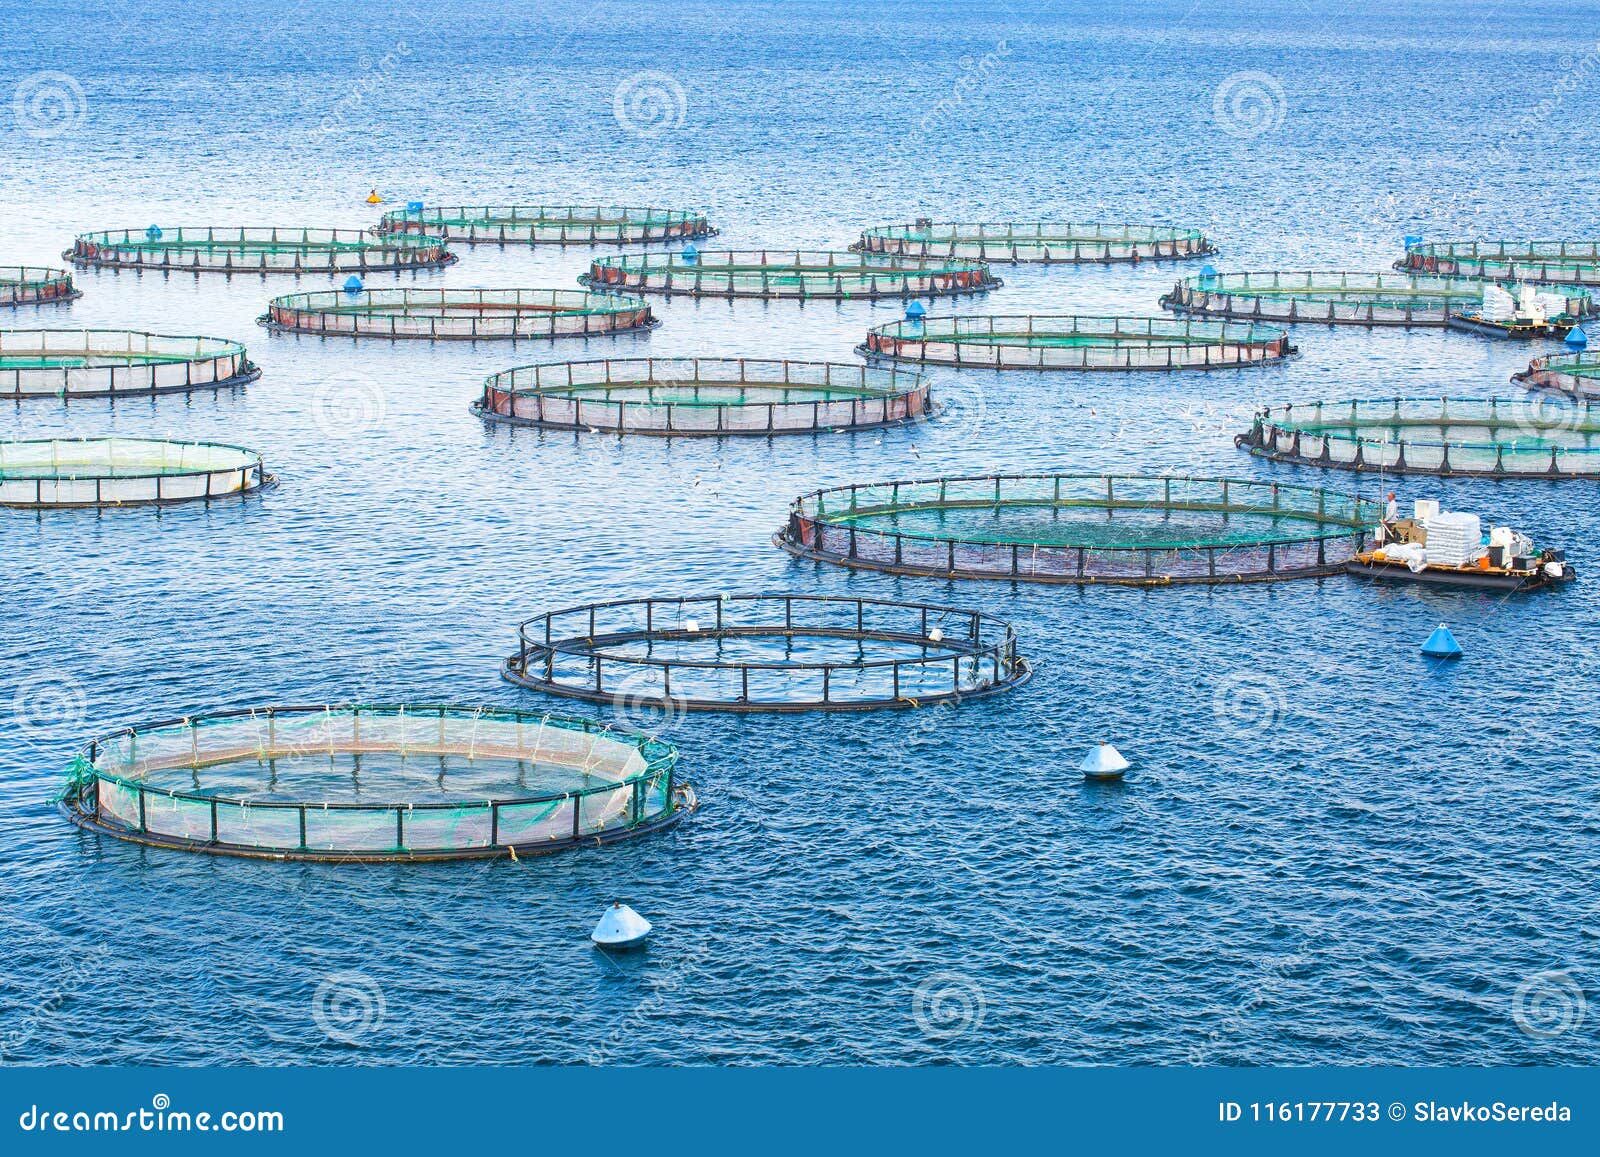 Sea Fish Farm. Cages for Fish Farming Dorado and Seabass. the Workers Feed  the Fish a Forage Stock Image - Image of bream, coastline: 116177733